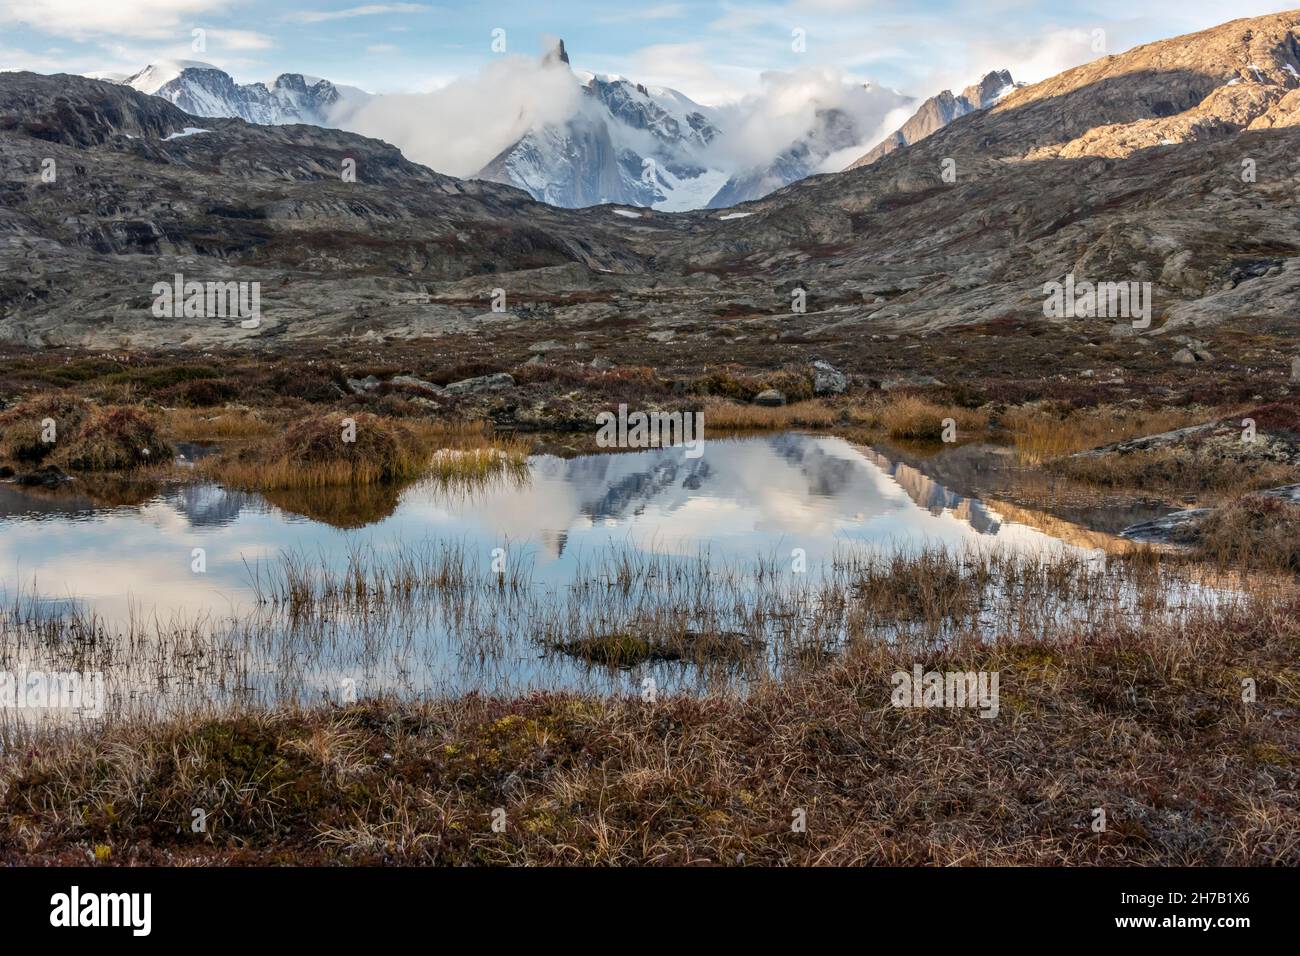 Mountain reflections and sedge grasses (Carex sp.) growing by a melt water pond, NE Milne Land, Scoresby Sund, Greenland Stock Photo